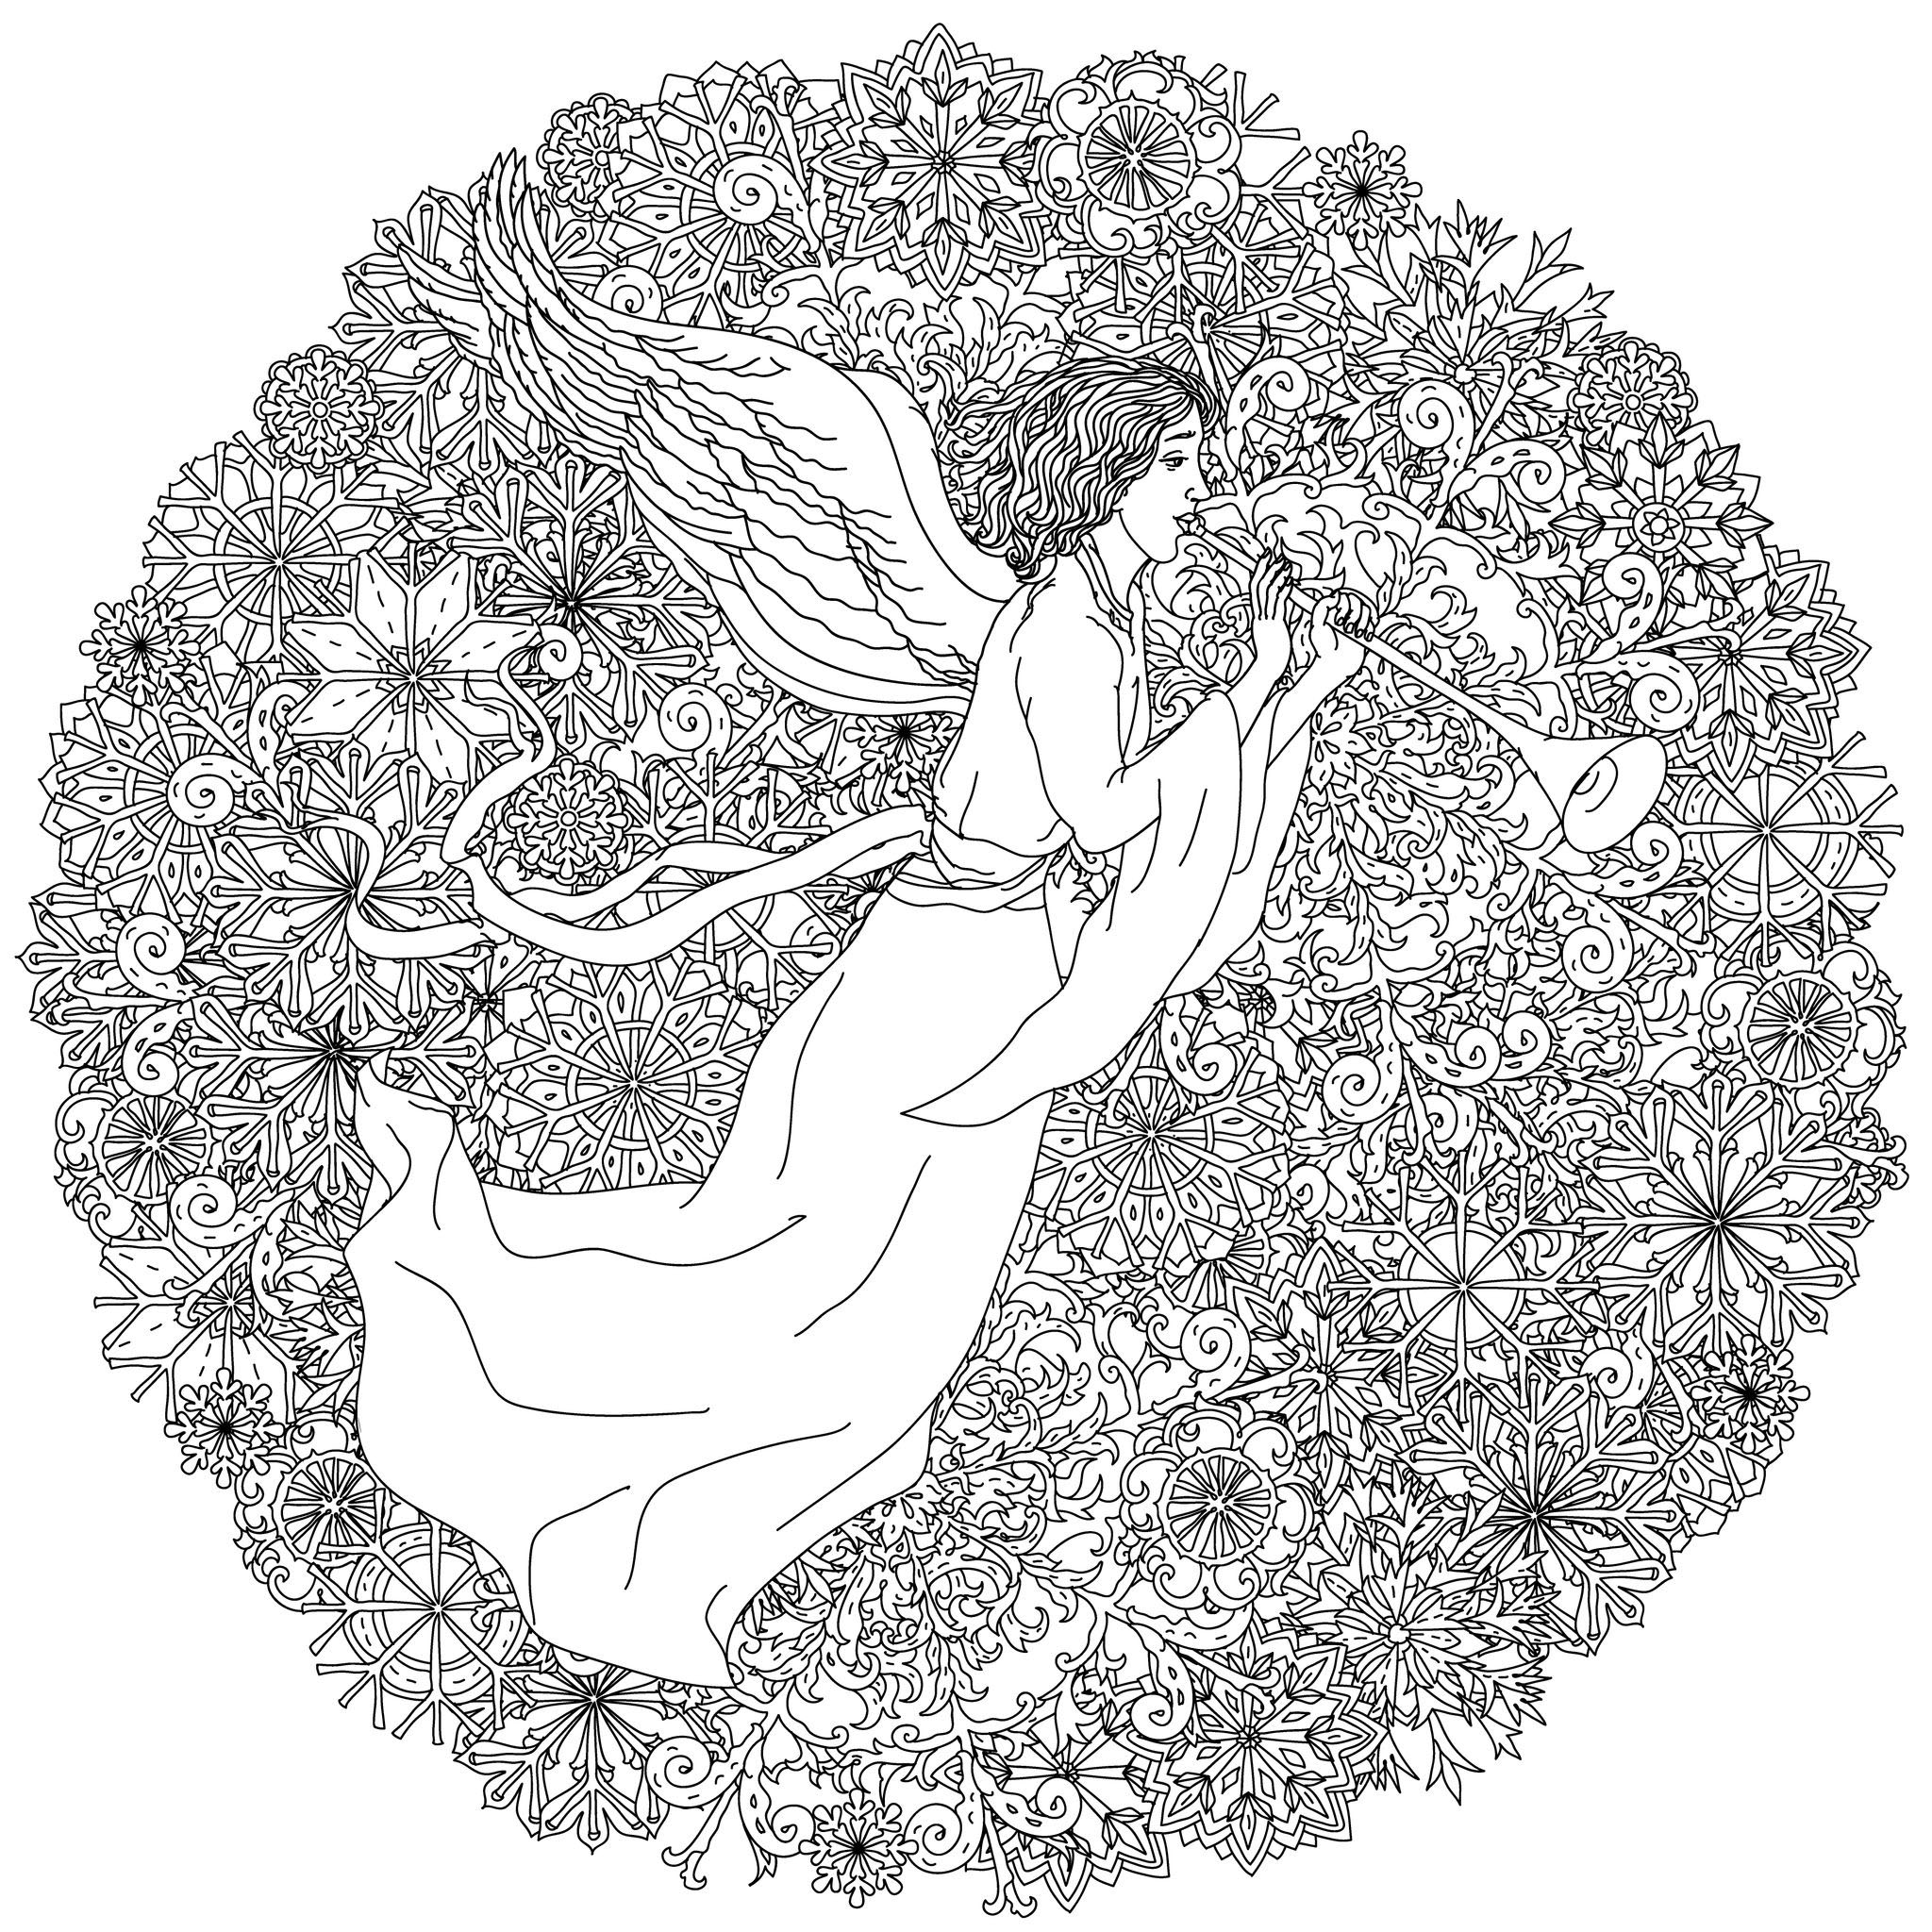 Angel - Coloring Pages for Adults